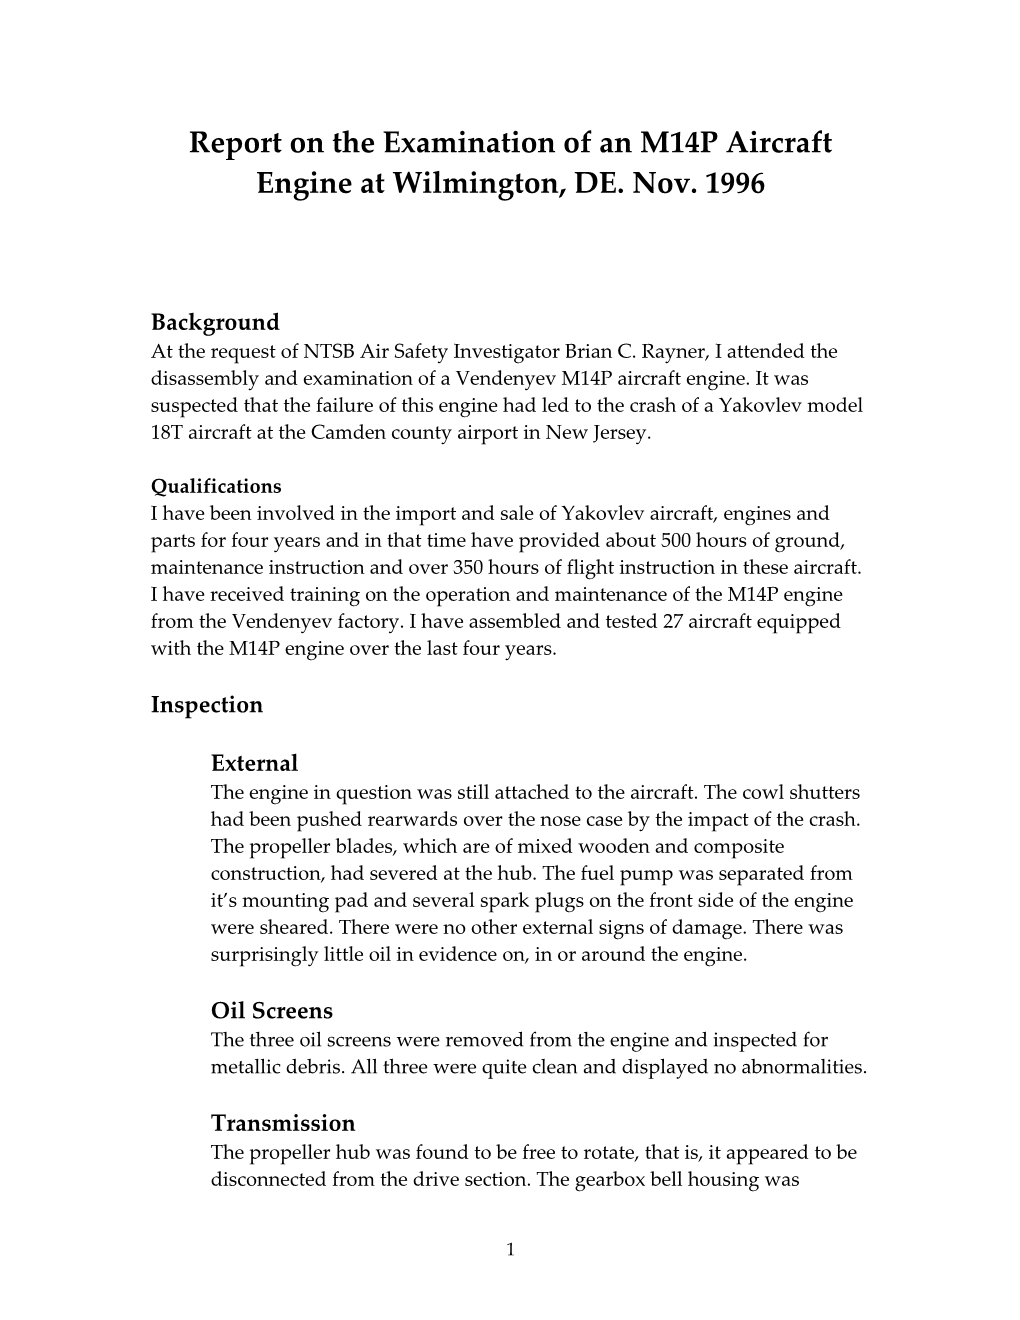 Report on the Examination of an M14P Aircraft Engine at Wilminton, DE. Nov. 1996